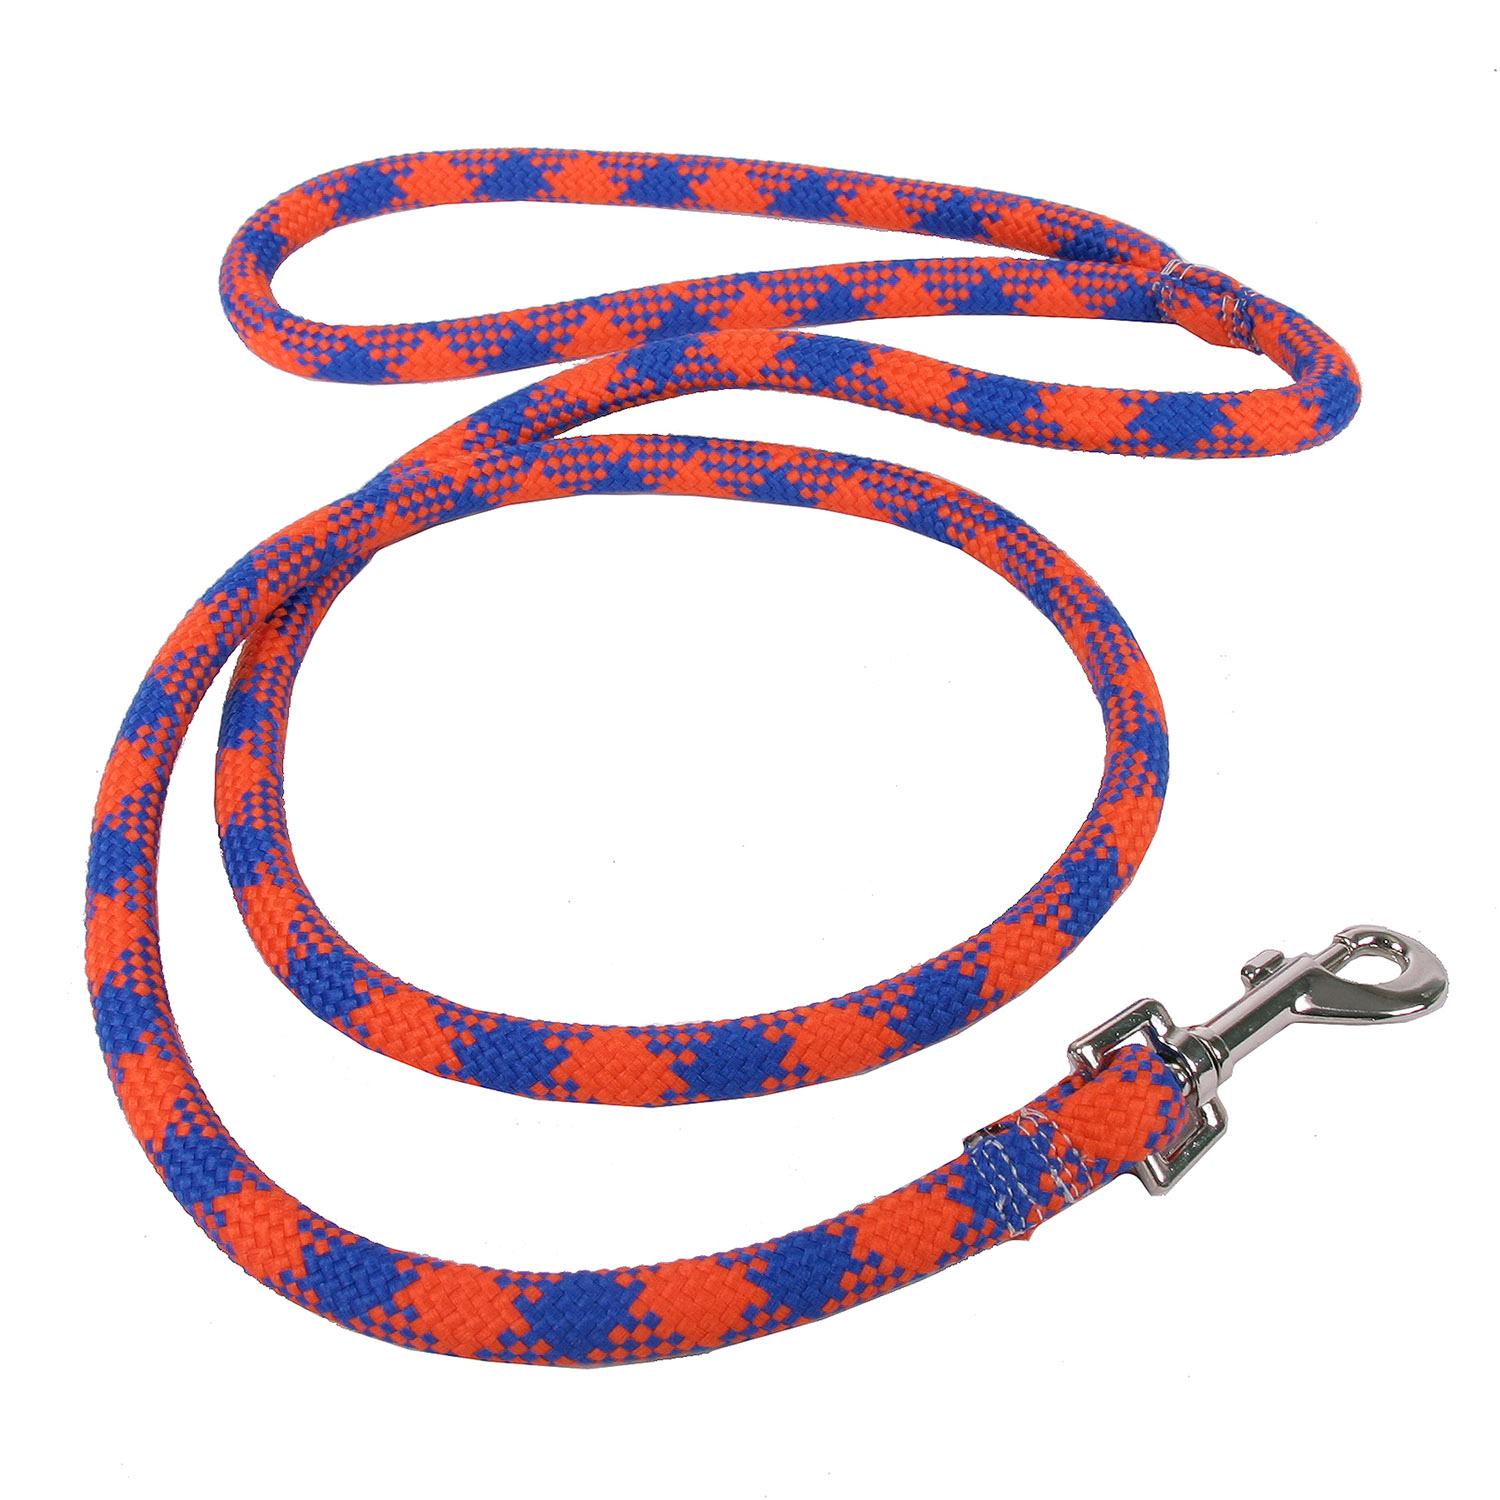 Round Braided Team Colors Dog Leash by Yellow Dog - Orange and Blue